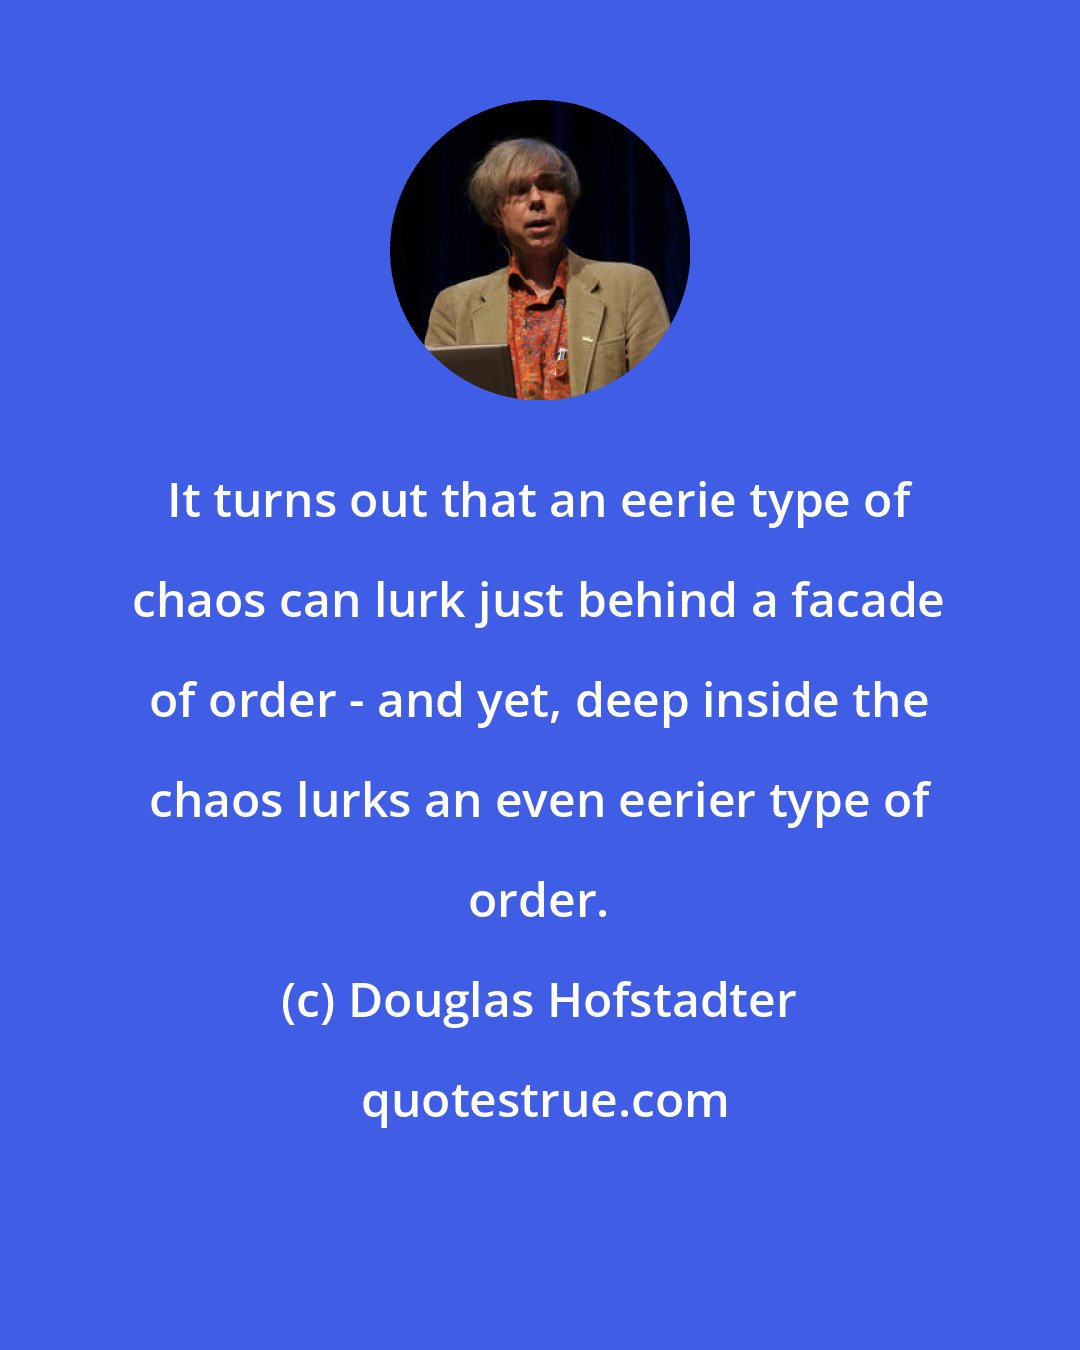 Douglas Hofstadter: It turns out that an eerie type of chaos can lurk just behind a facade of order - and yet, deep inside the chaos lurks an even eerier type of order.